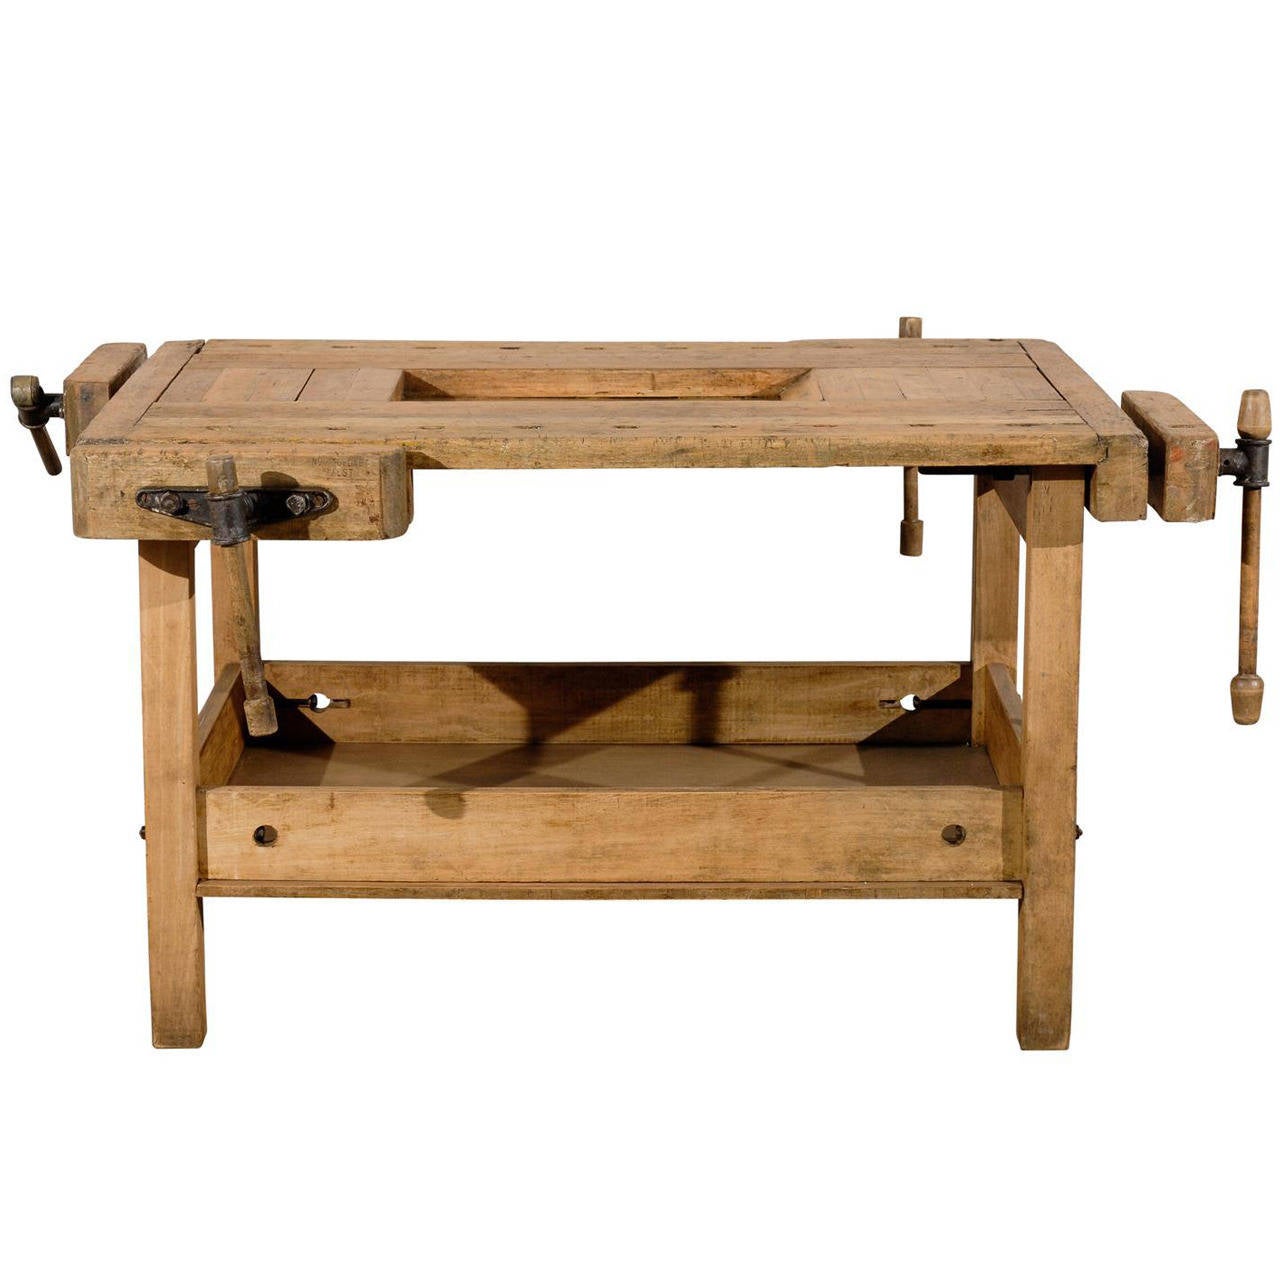 Very Unusual European Wooden Workbench from the 19th 